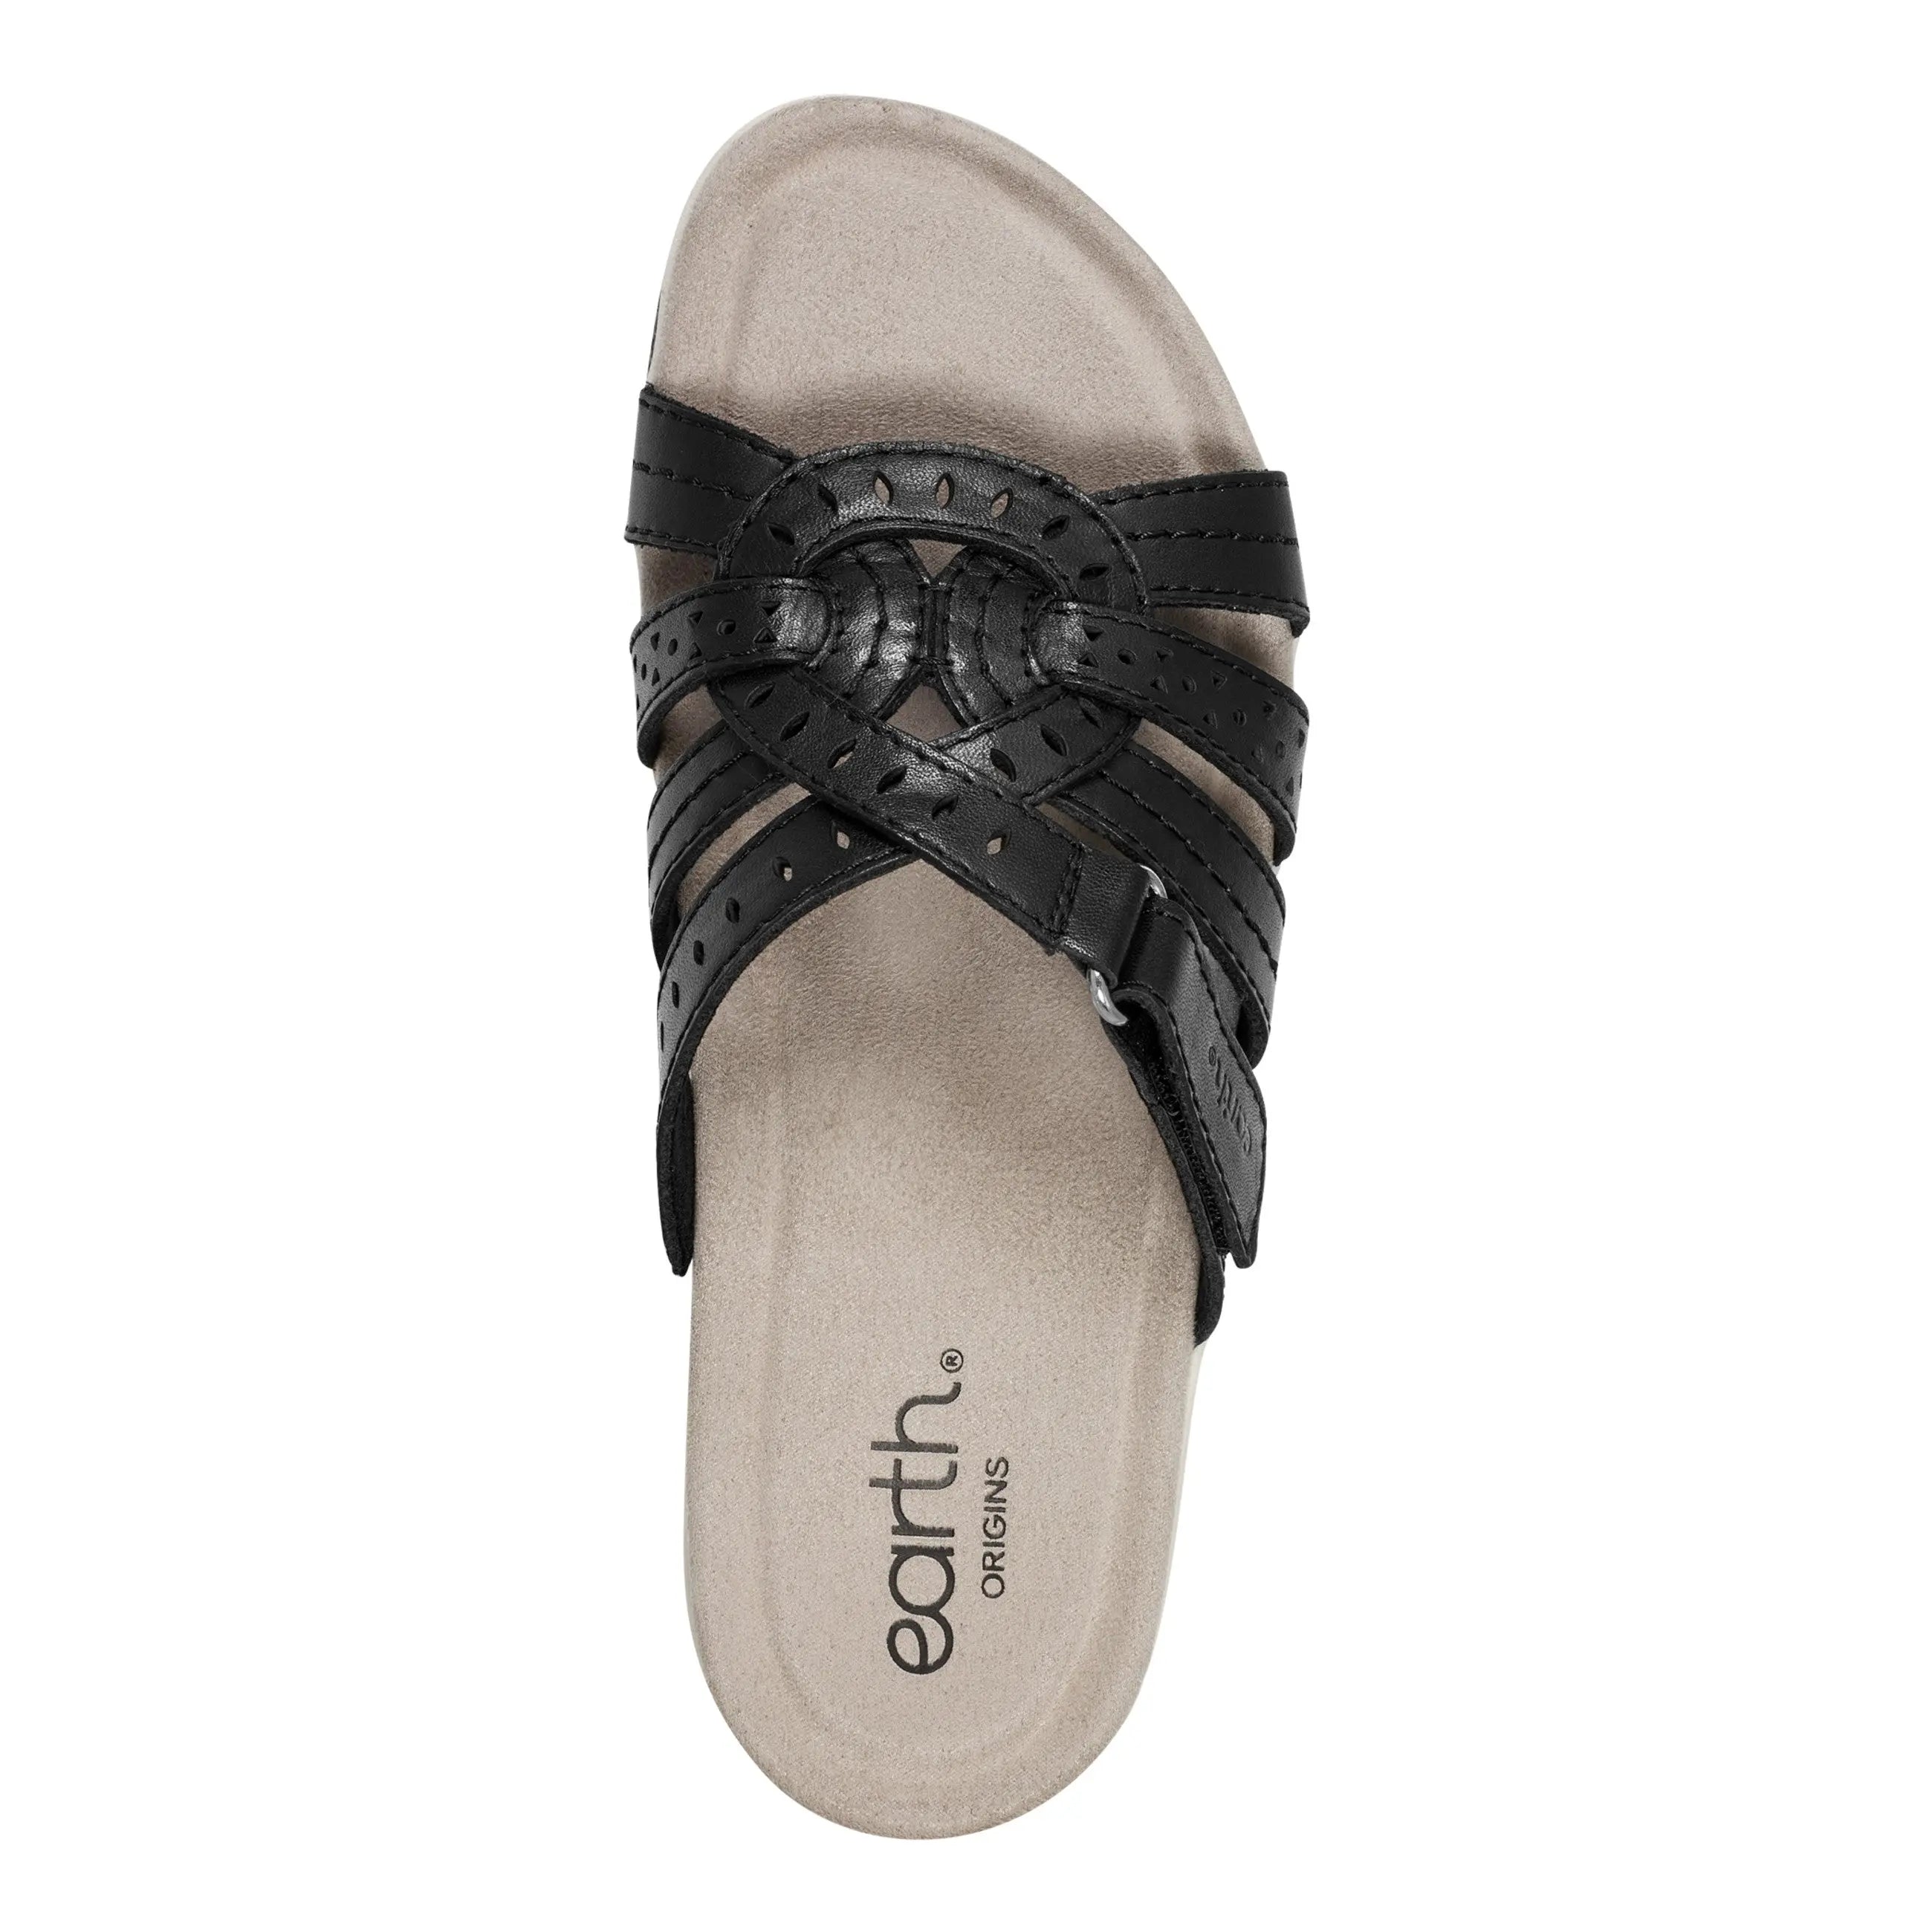 Sassoni Strappy Casual Slip-On Flat Sandals